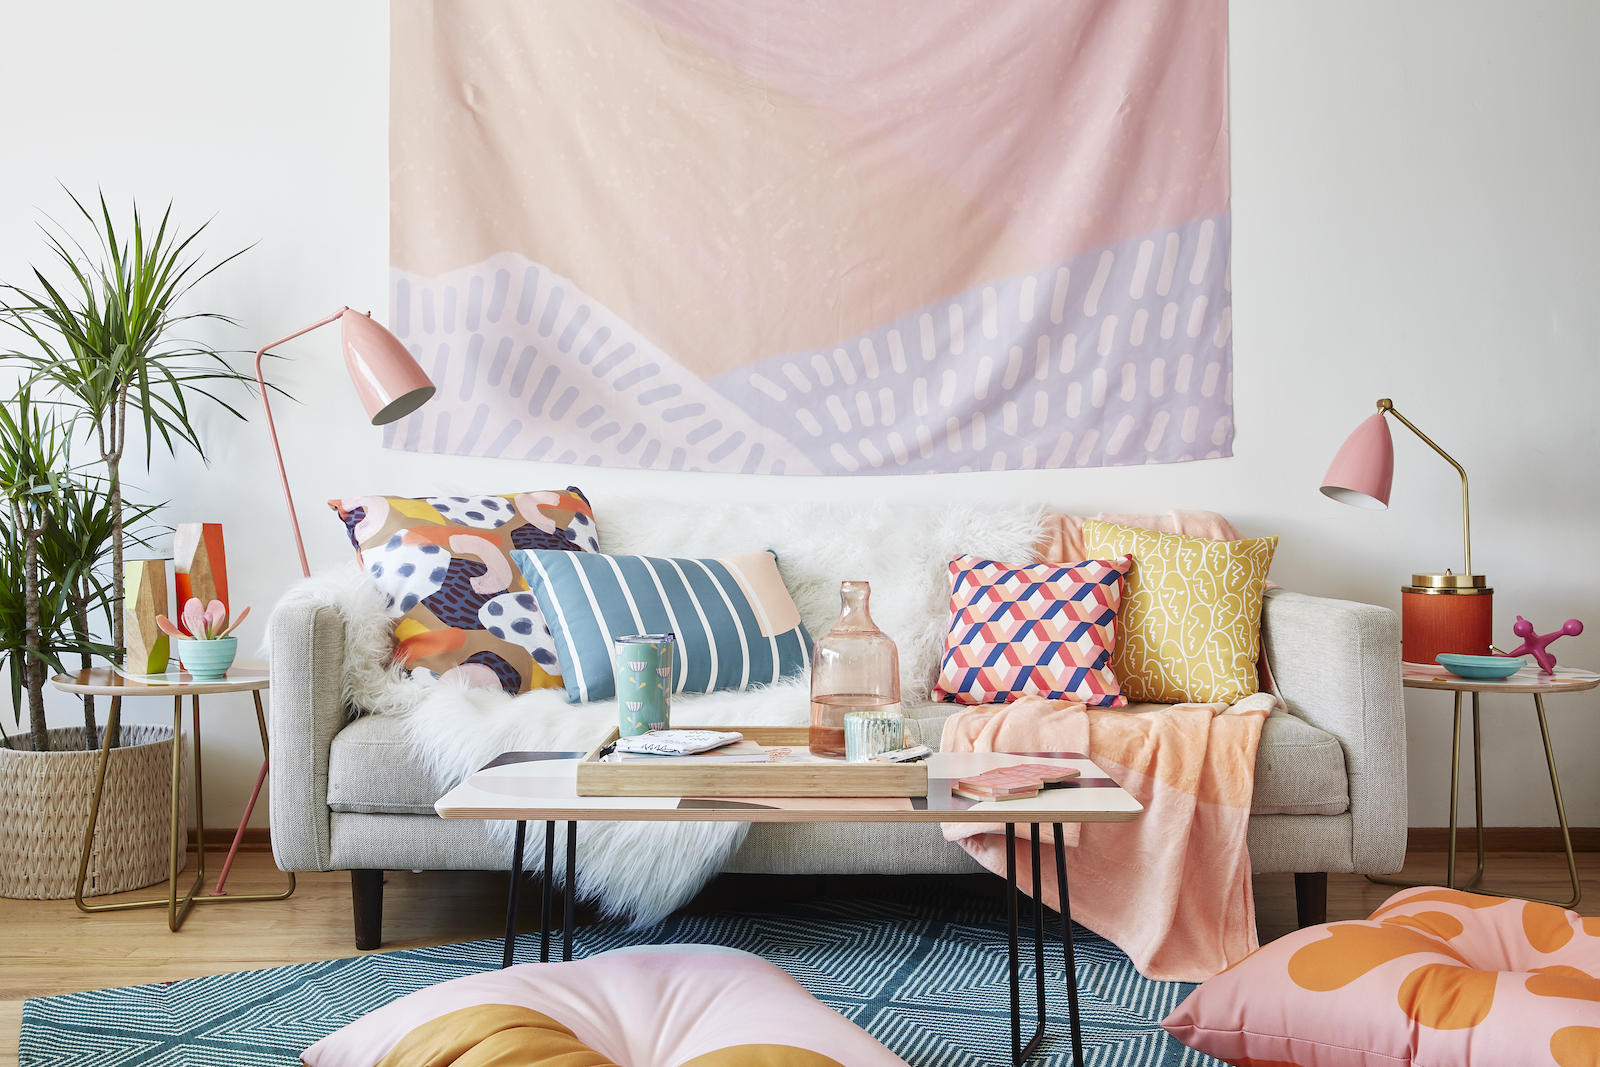 Quiz: What's Your Home Decor Style? - Society6 Blog